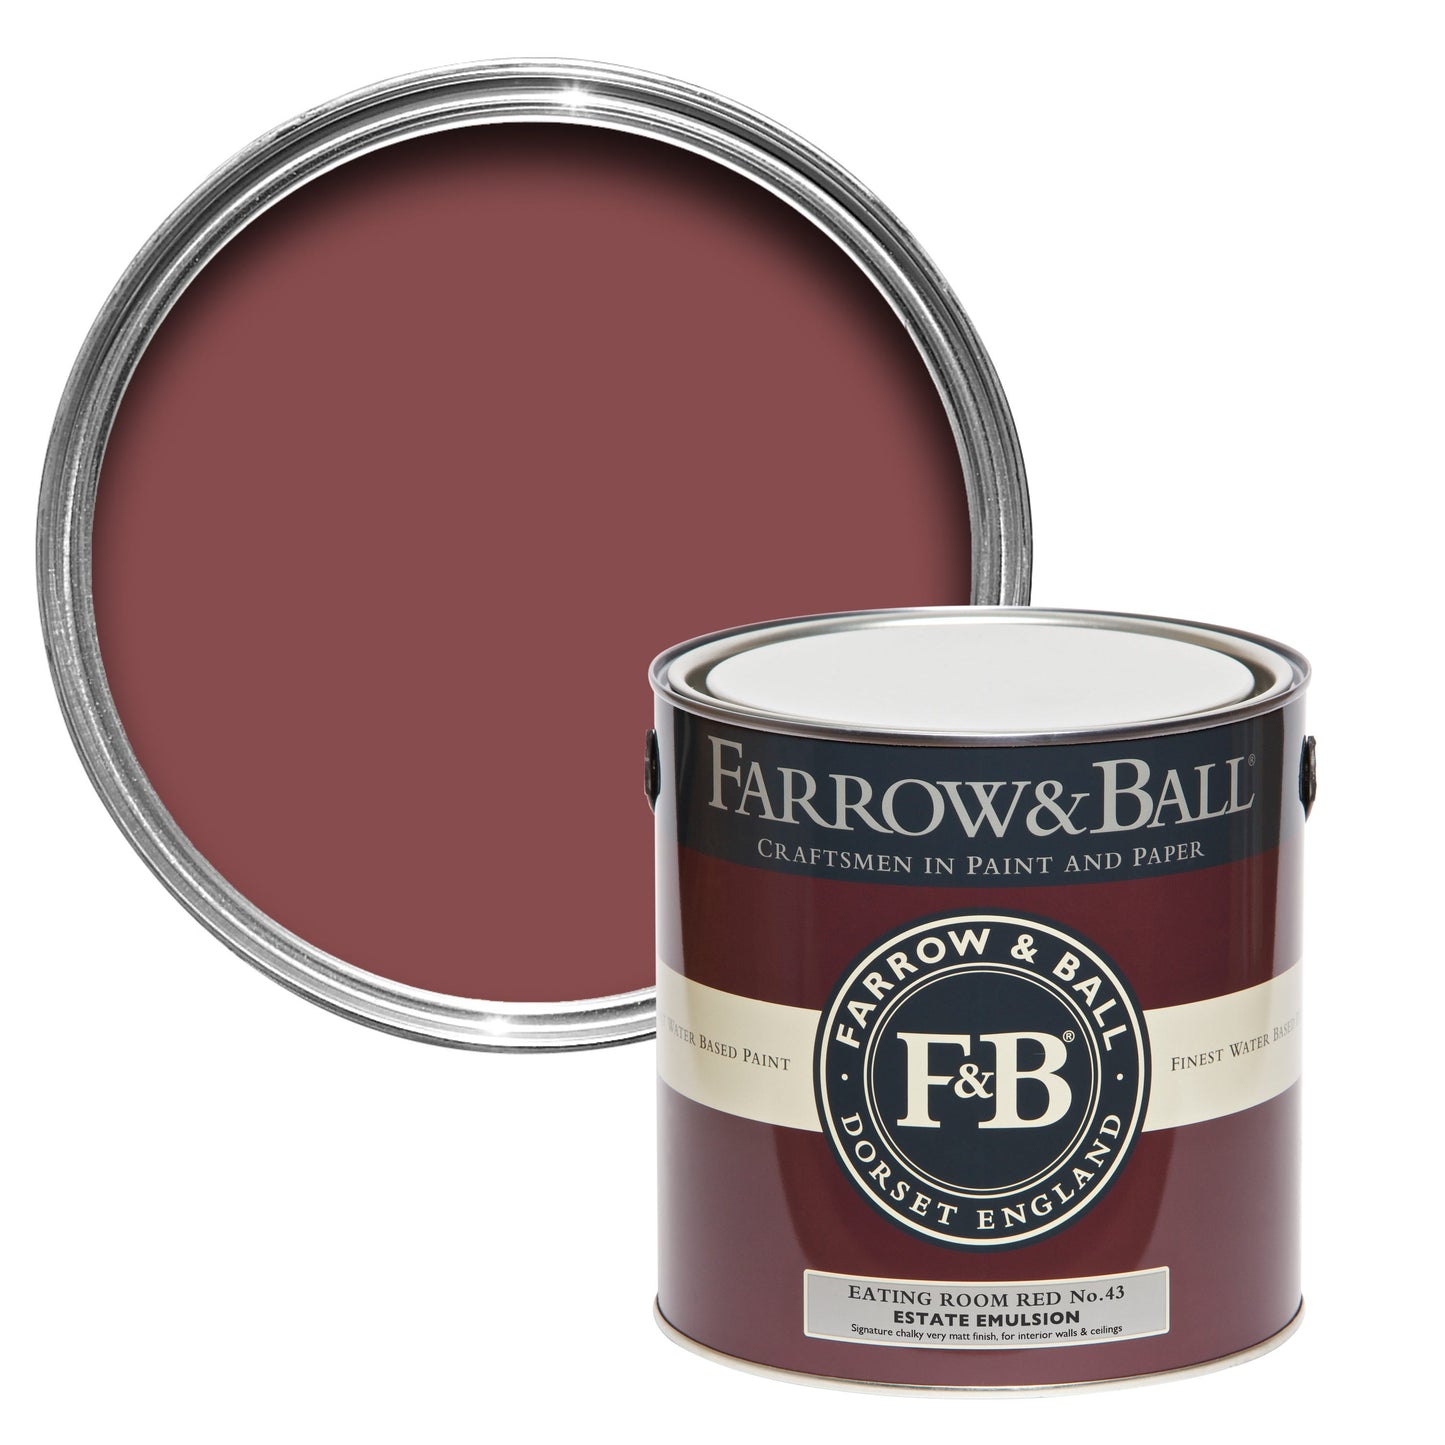 2.5L Modern Eggshell Eating Room Red No.43